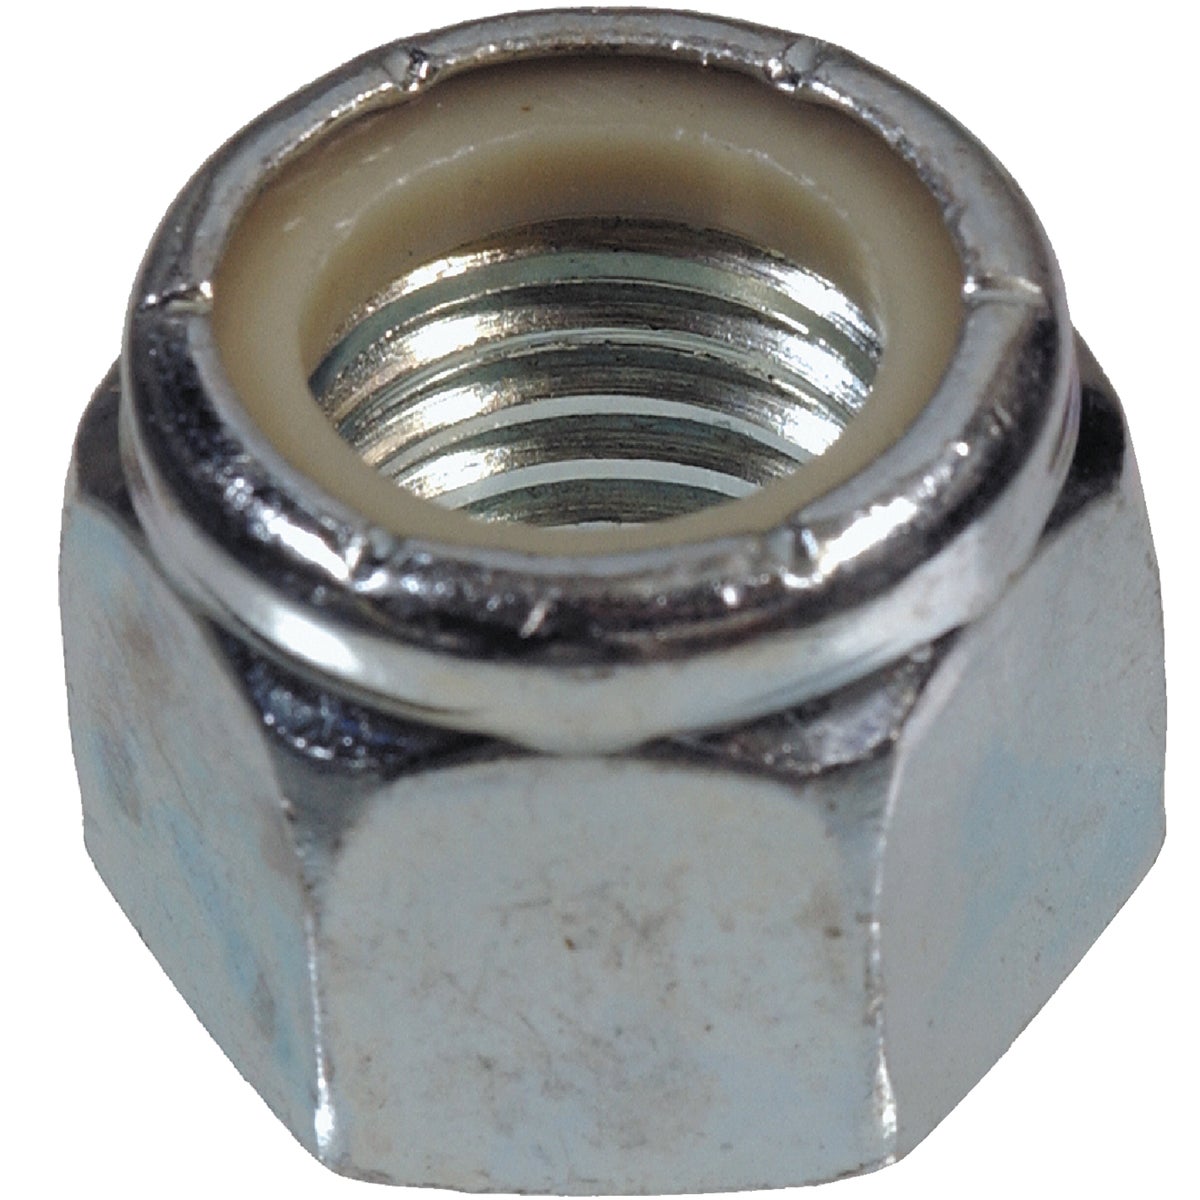 Item 720933, These nylon insert stop &amp; lock nuts are ideal to securely fasten a bolt